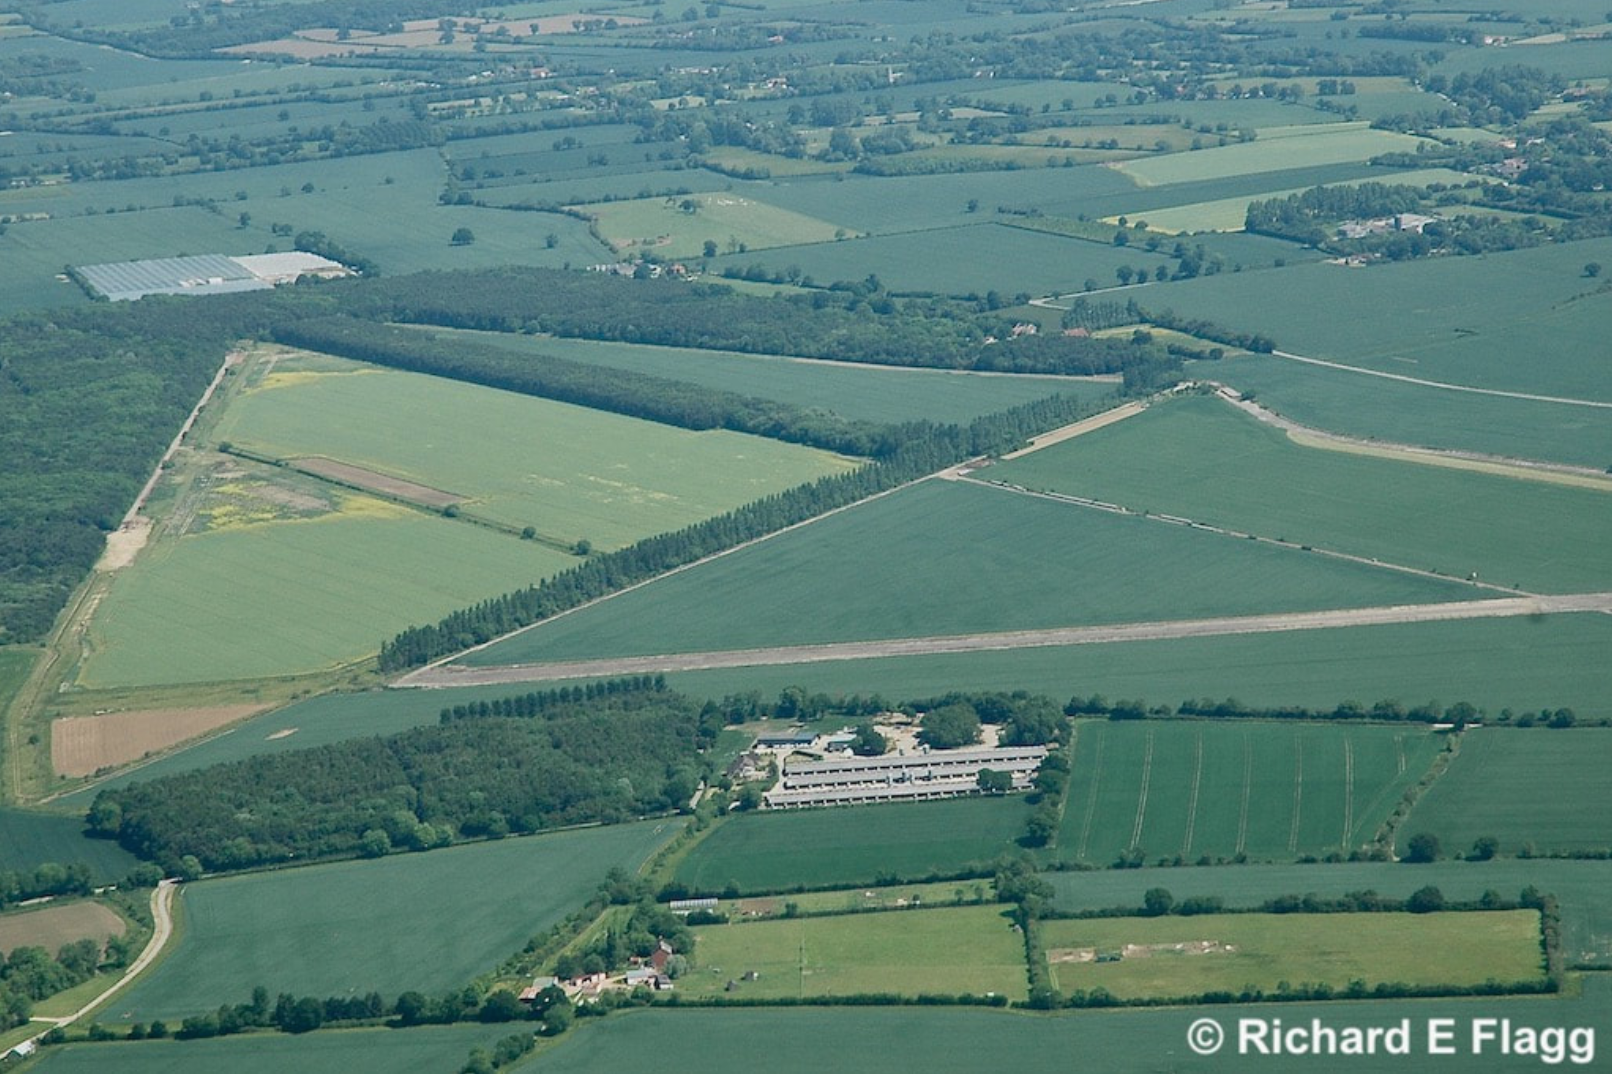 005Aerial View 2 of RAF Hardwick Airfield - 31 May 2009.png